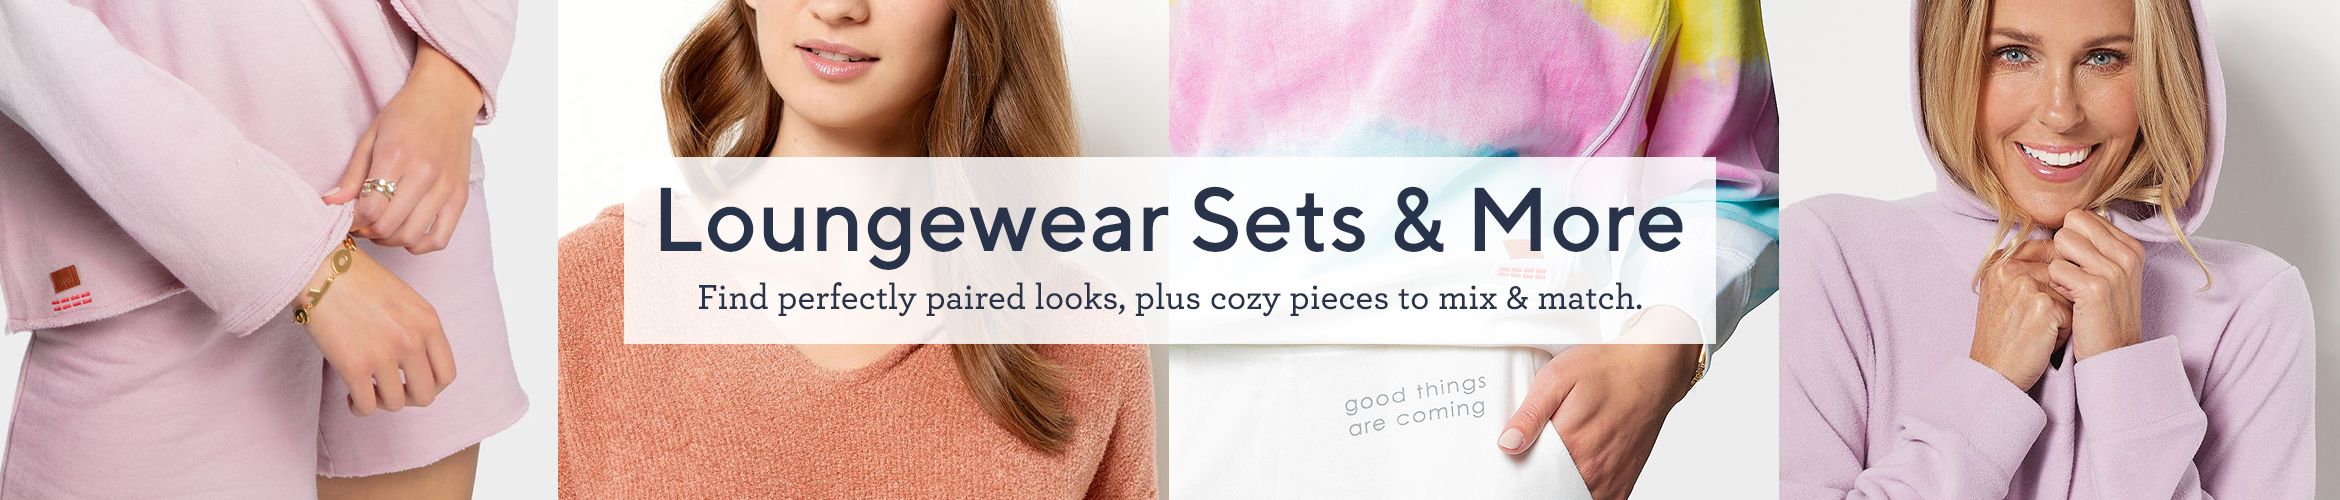 Loungewear Sets & More.  Find perfectly paired looks, plus cozy pieces to mix & match.